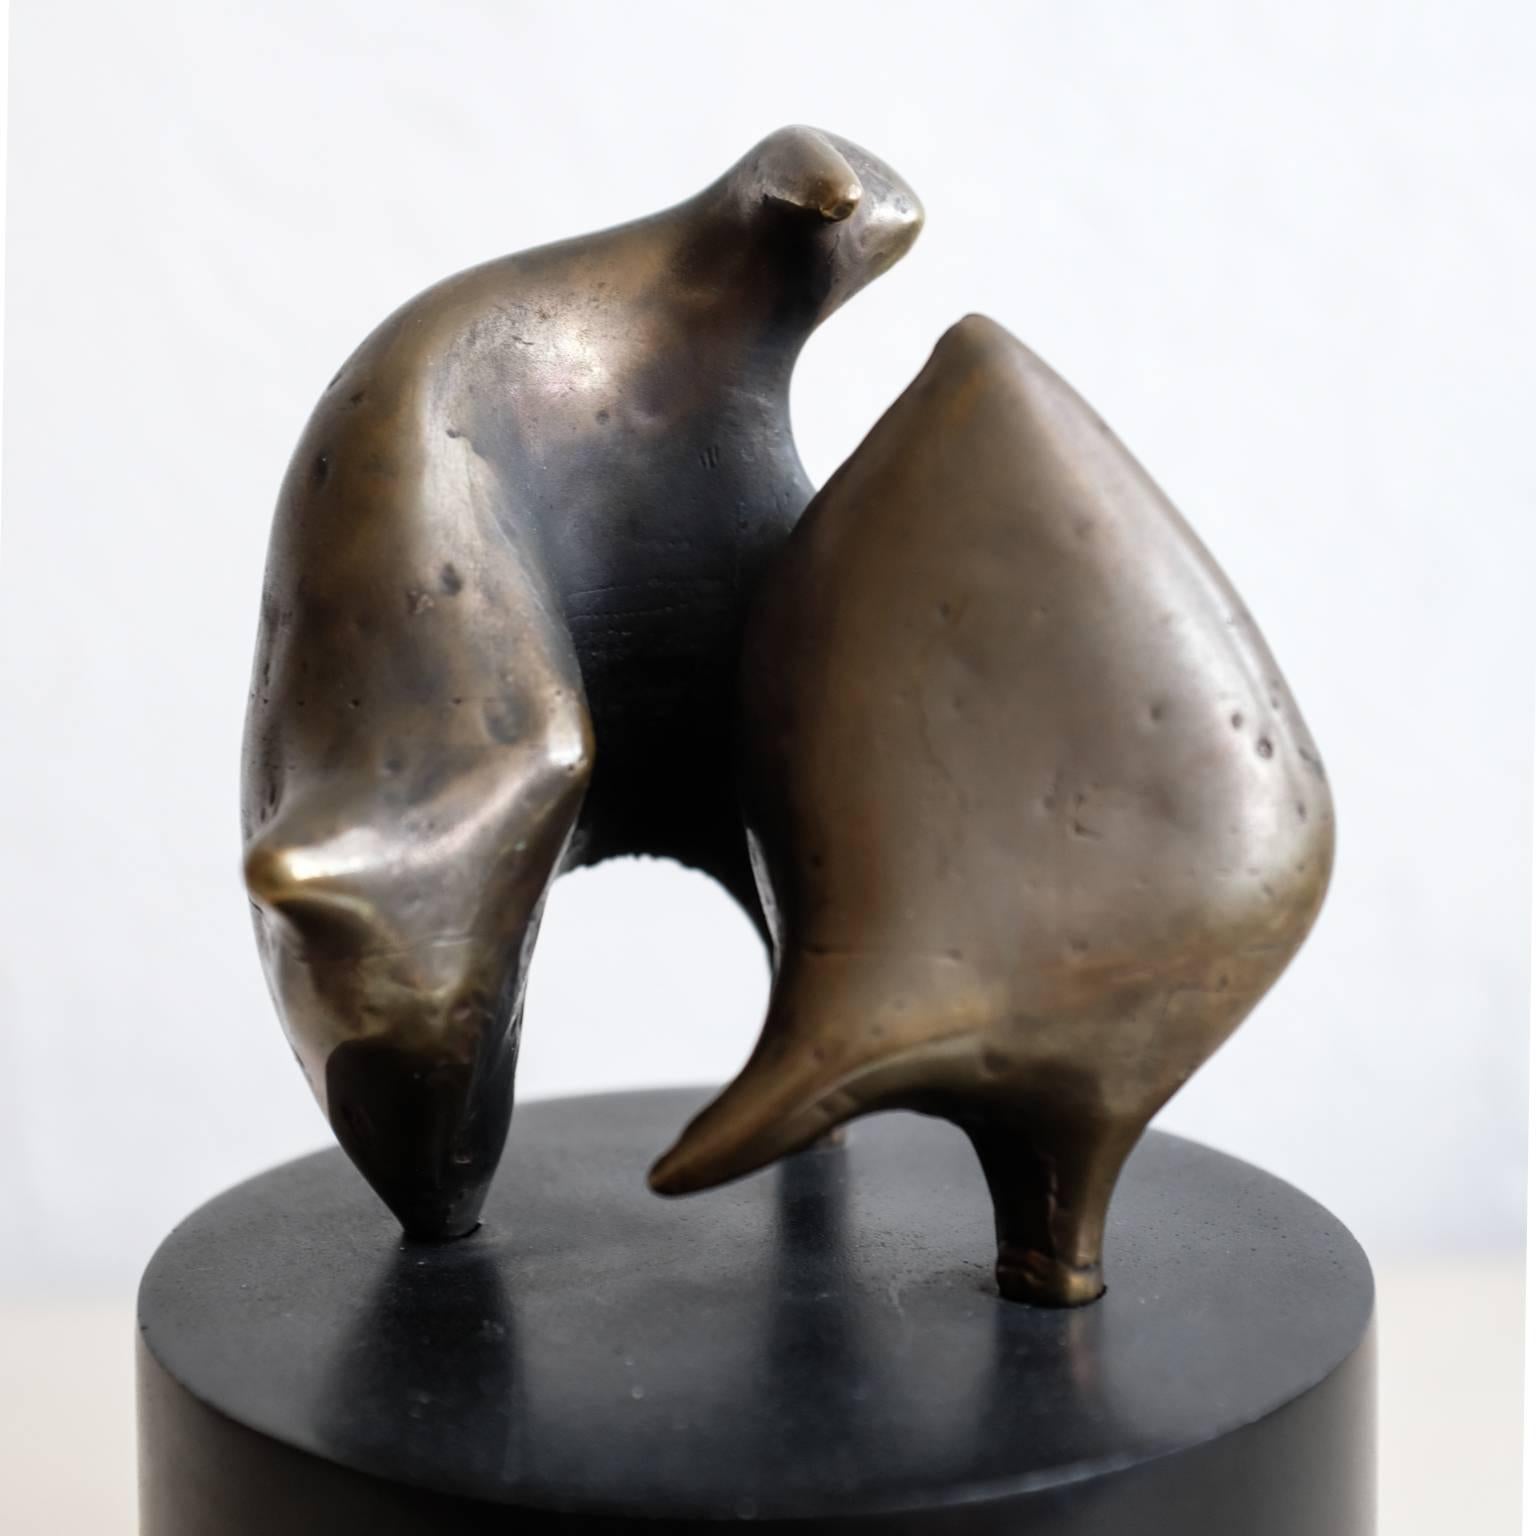 Solid bronze abstract sculpture by Eli Eli Karpel (1916-1988). Rotating ebonized wood base.

Signed by the artist. 

A native of New York, Karpel earned a master of fine arts degree from UCLA and taught there. He had several solo exhibitions